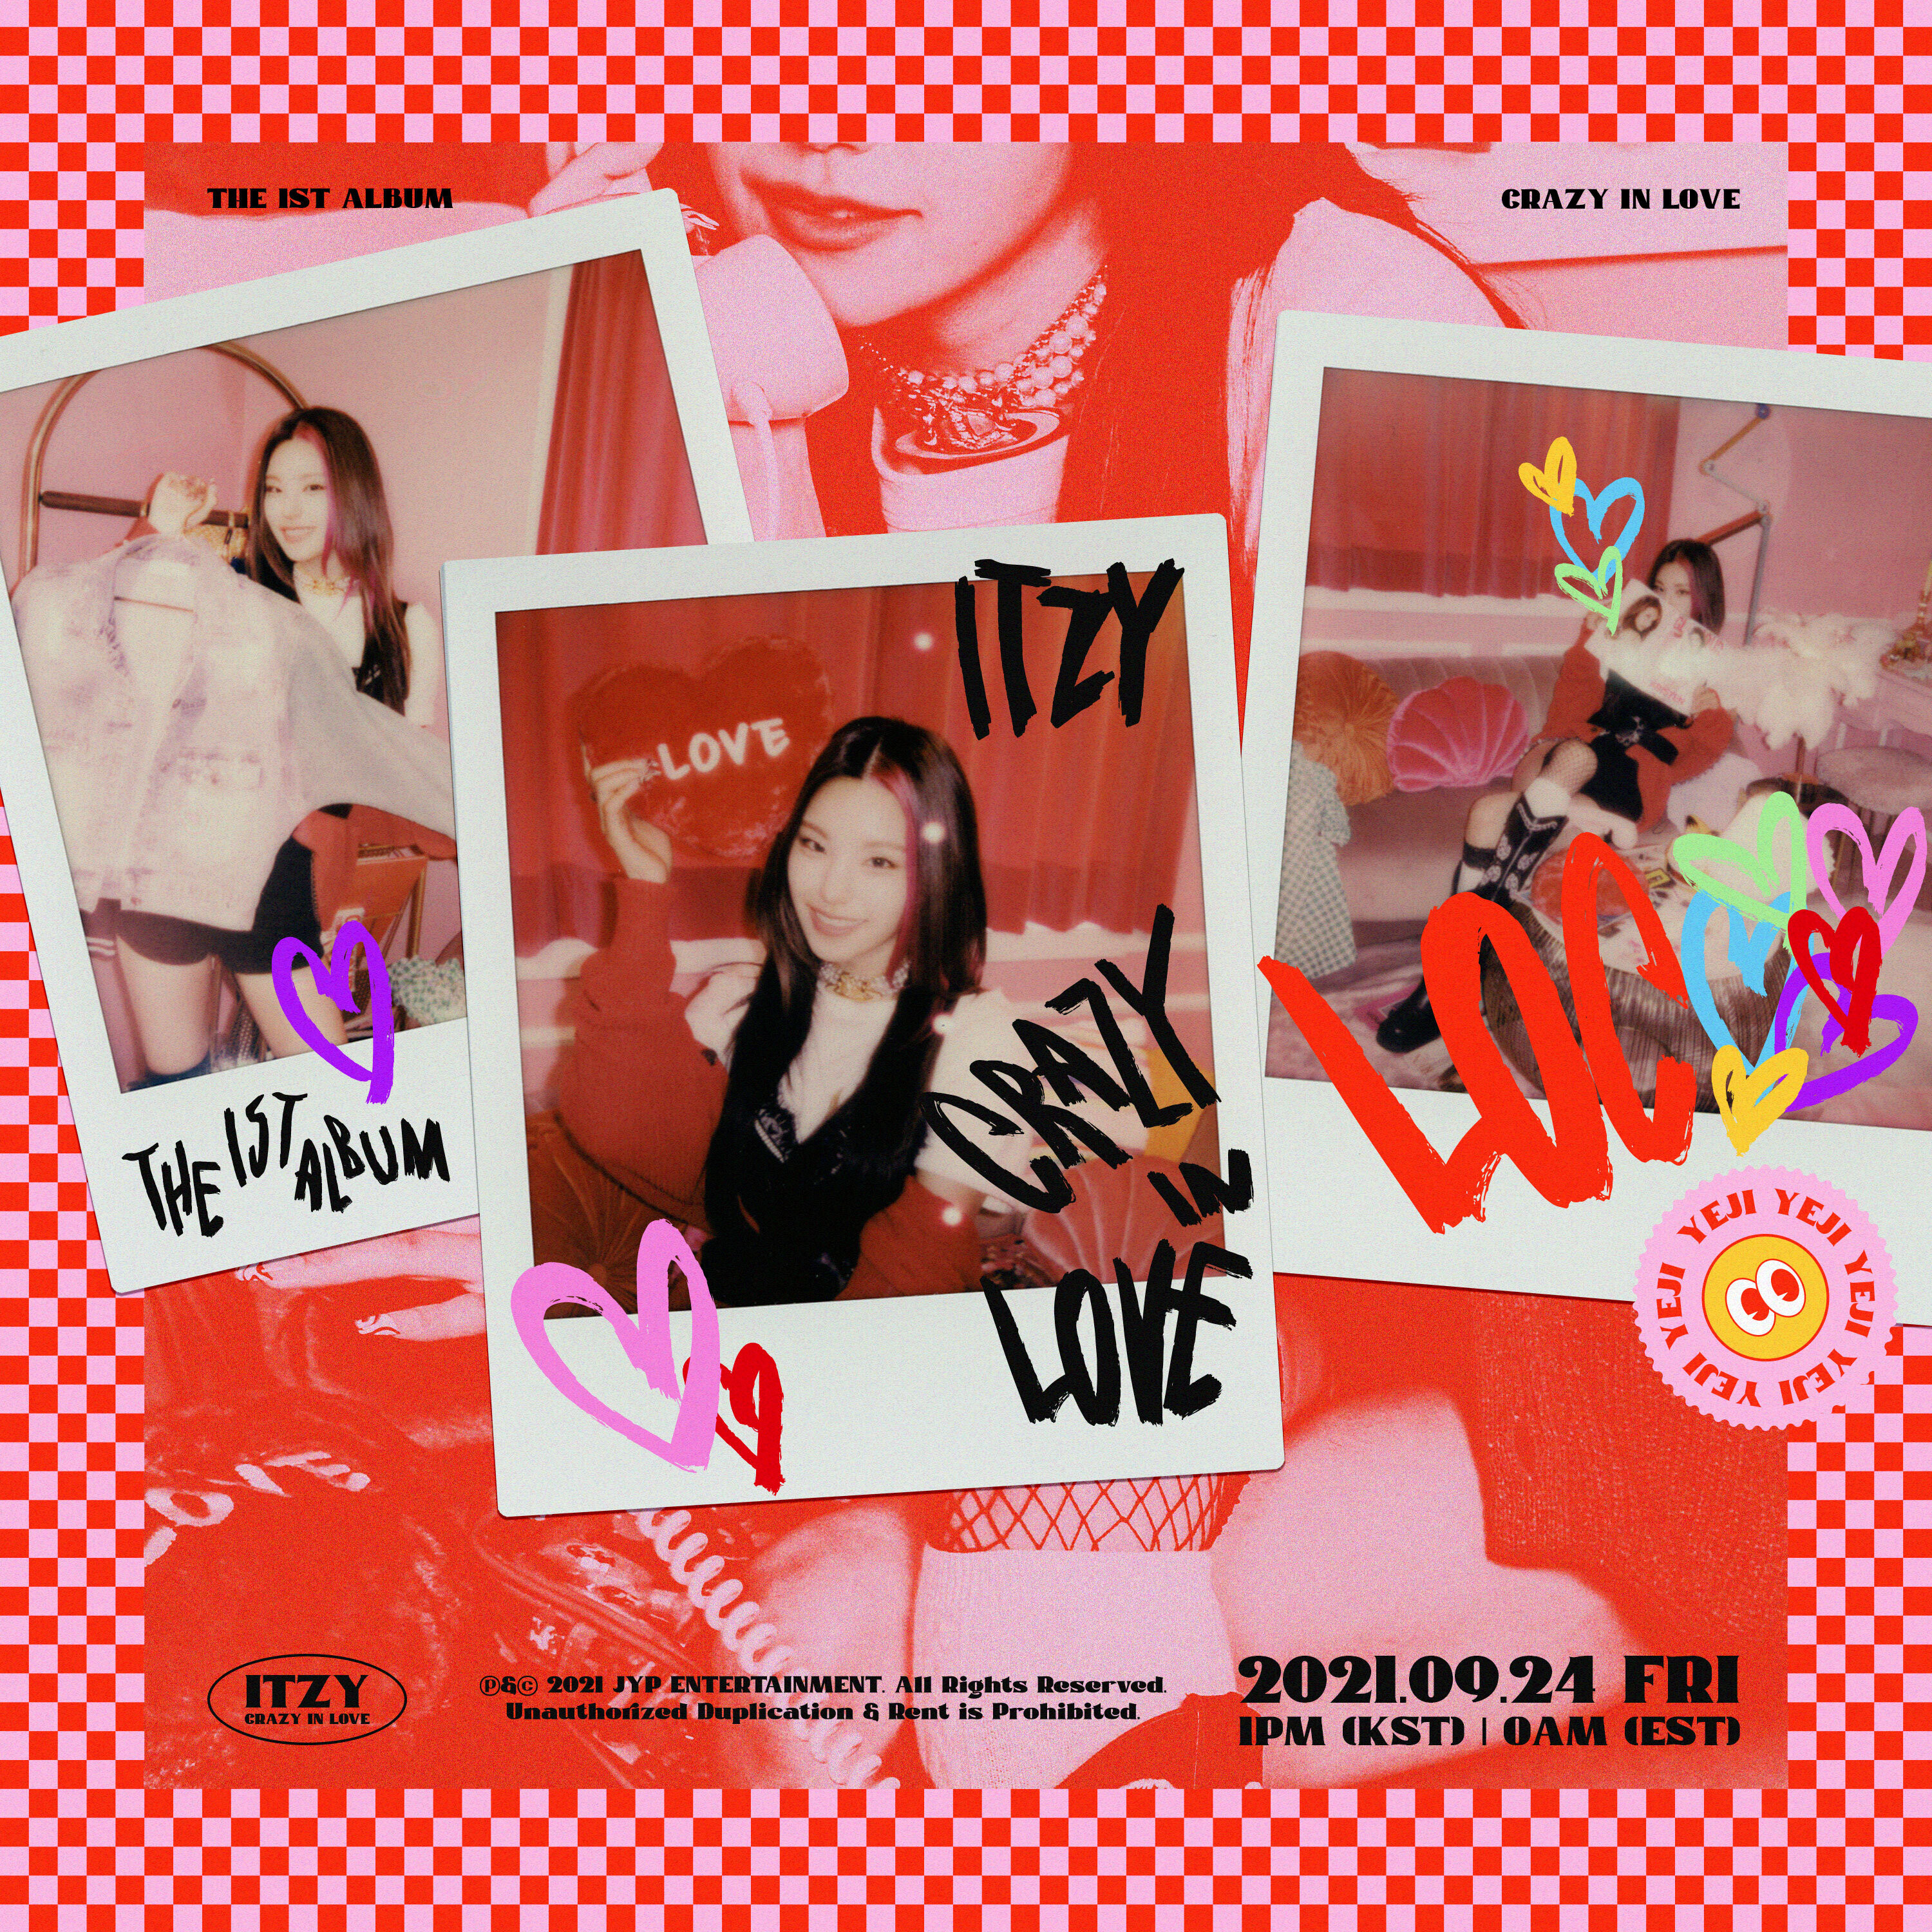 CRAZY IN LOVE - Album by ITZY, crazy in love 